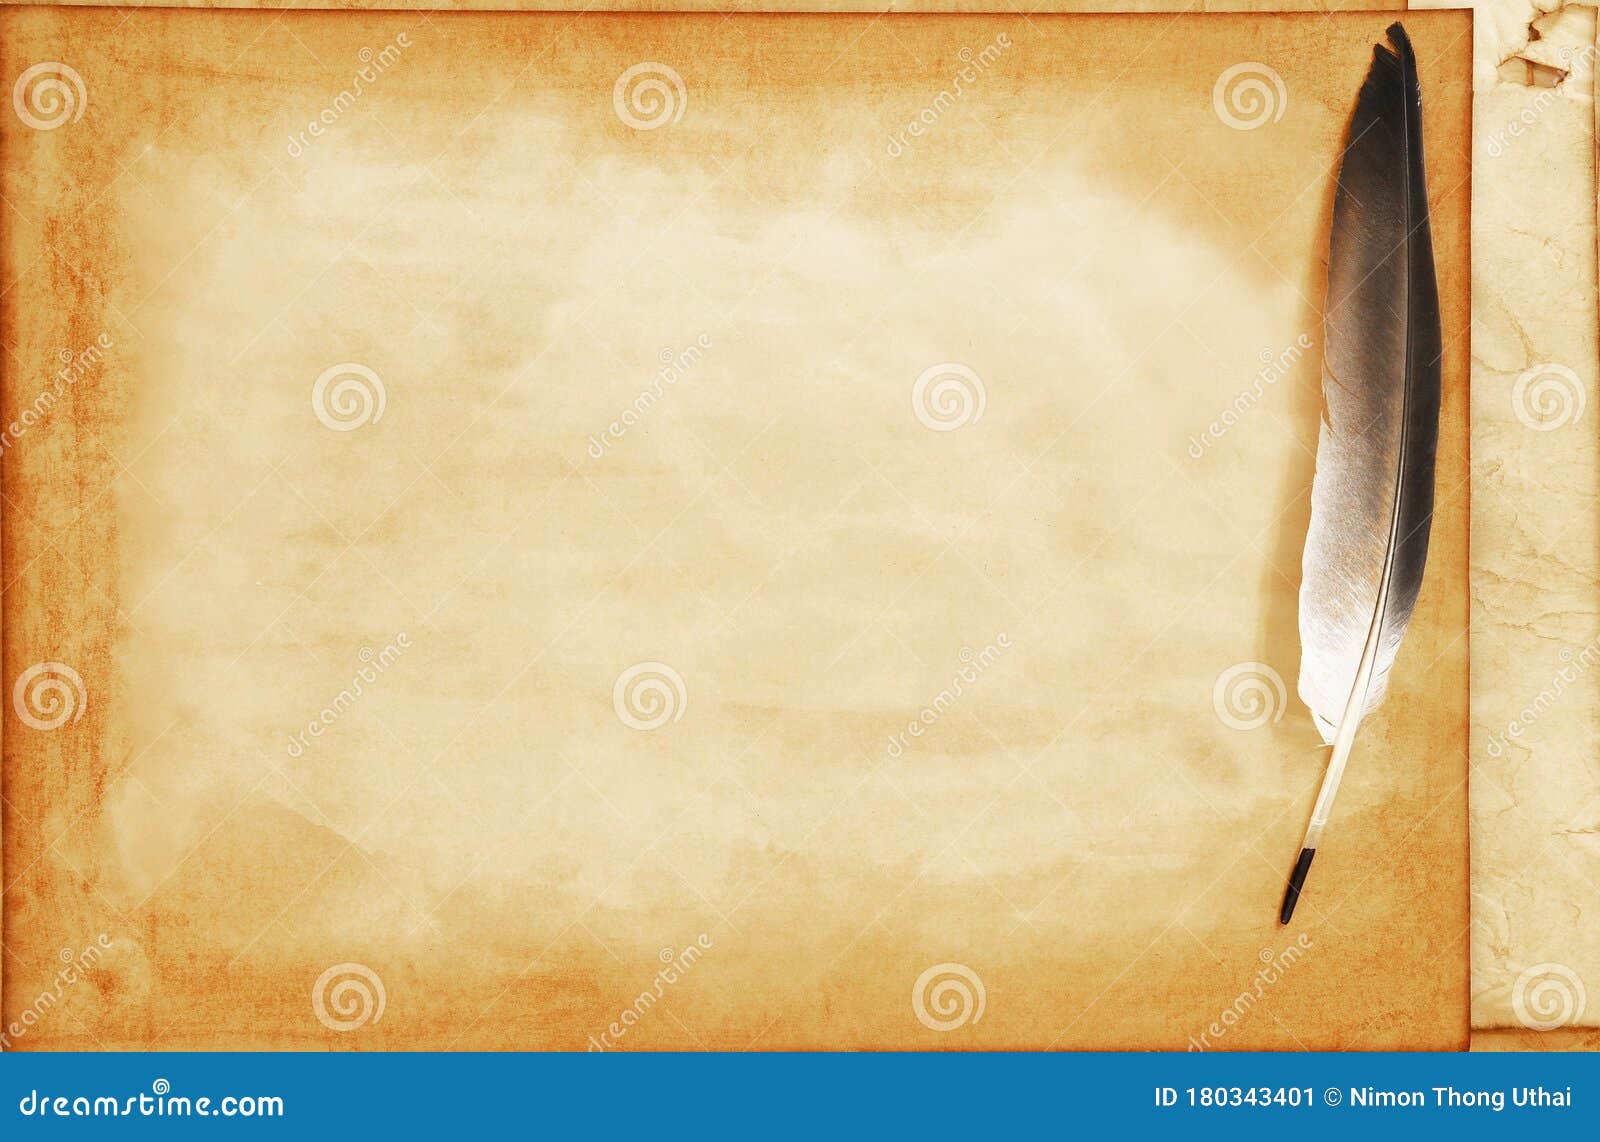 Old Paper on Brown Wood Texture and Feather Stock Image - Image of retro,  background: 180343401